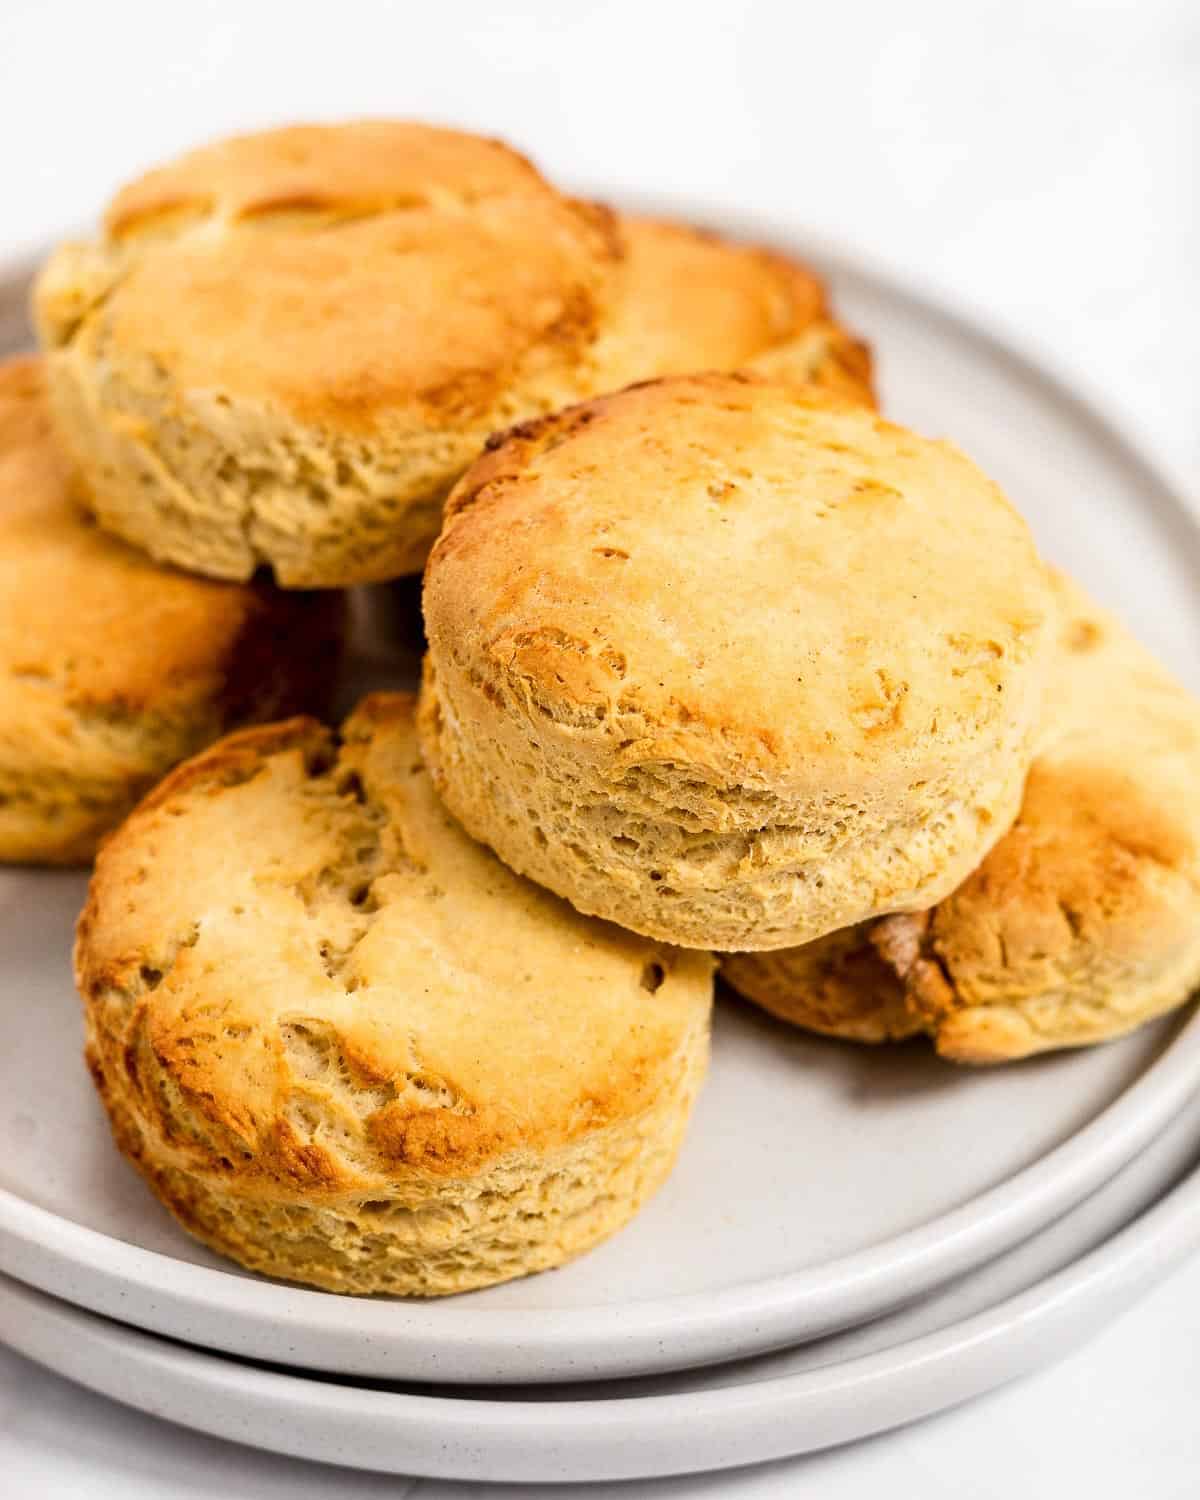 A stack of freshly baked scones on a grey plate.